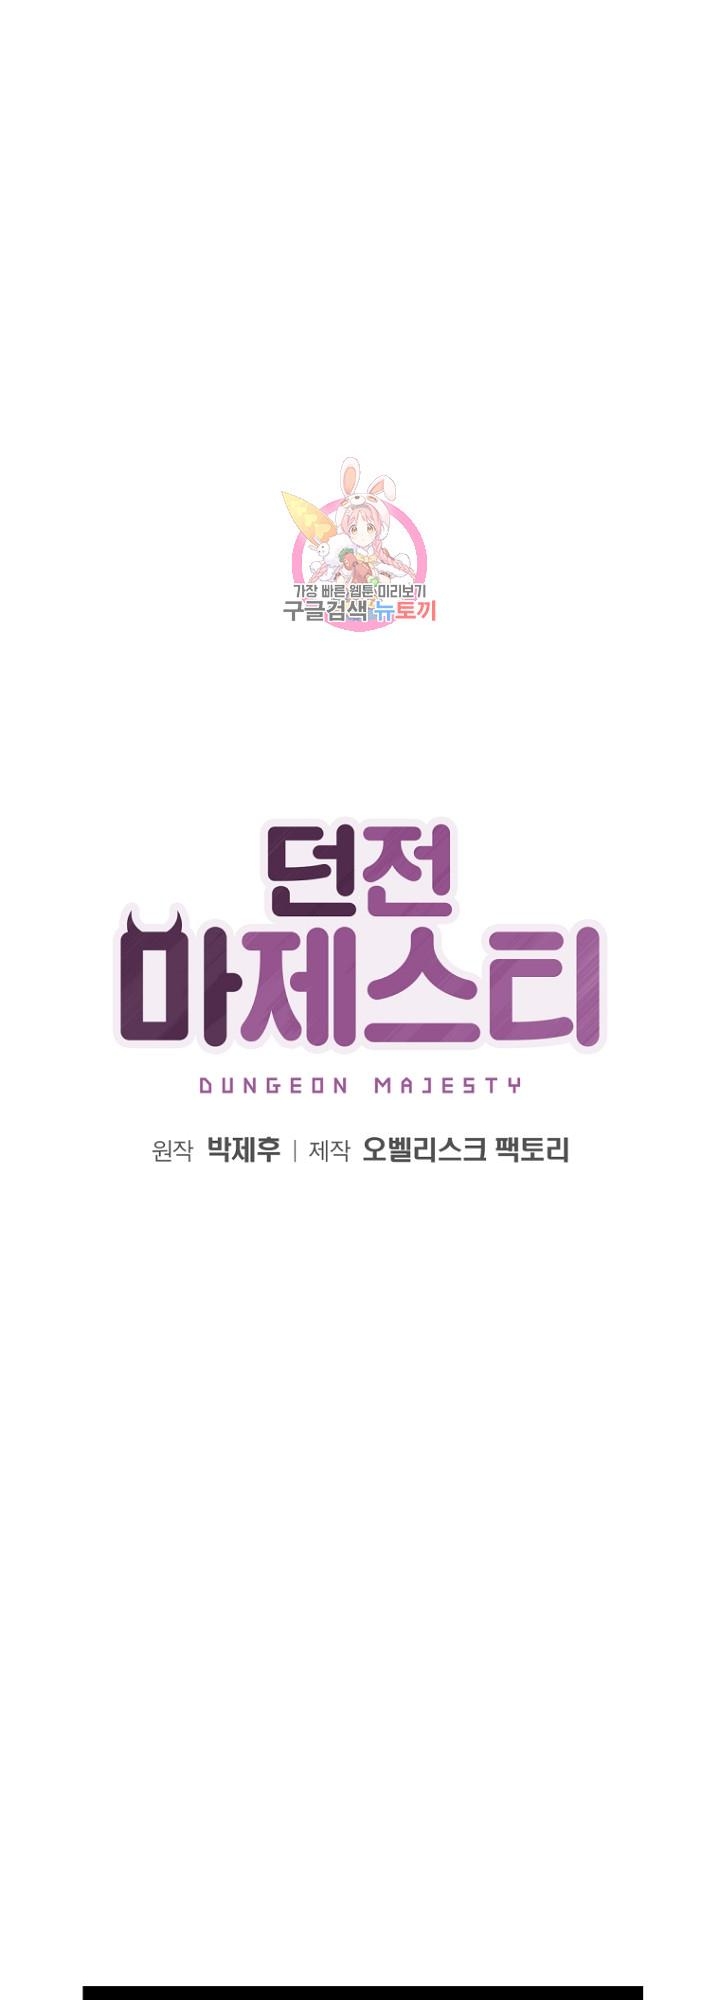 Dungeon Majesty 147